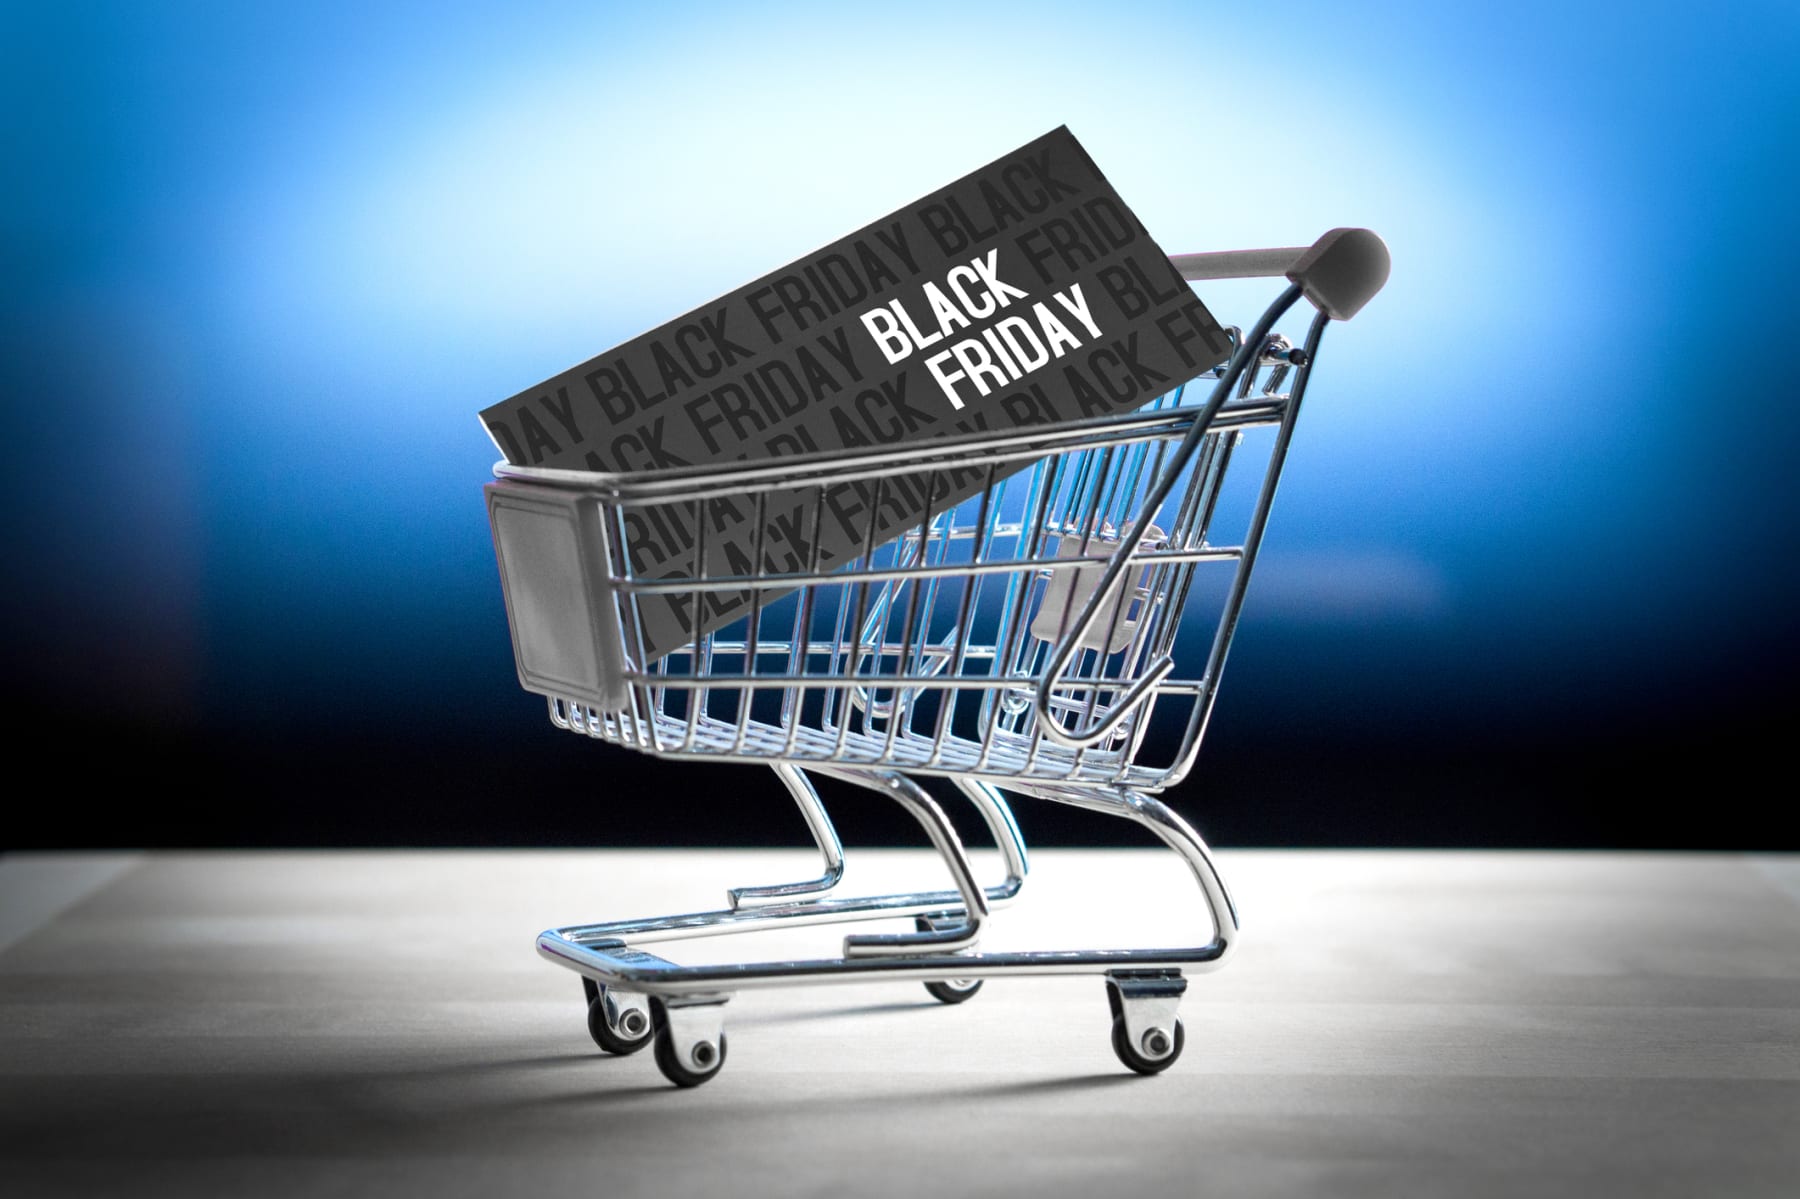 Black Friday card in a tiny shopping cart.